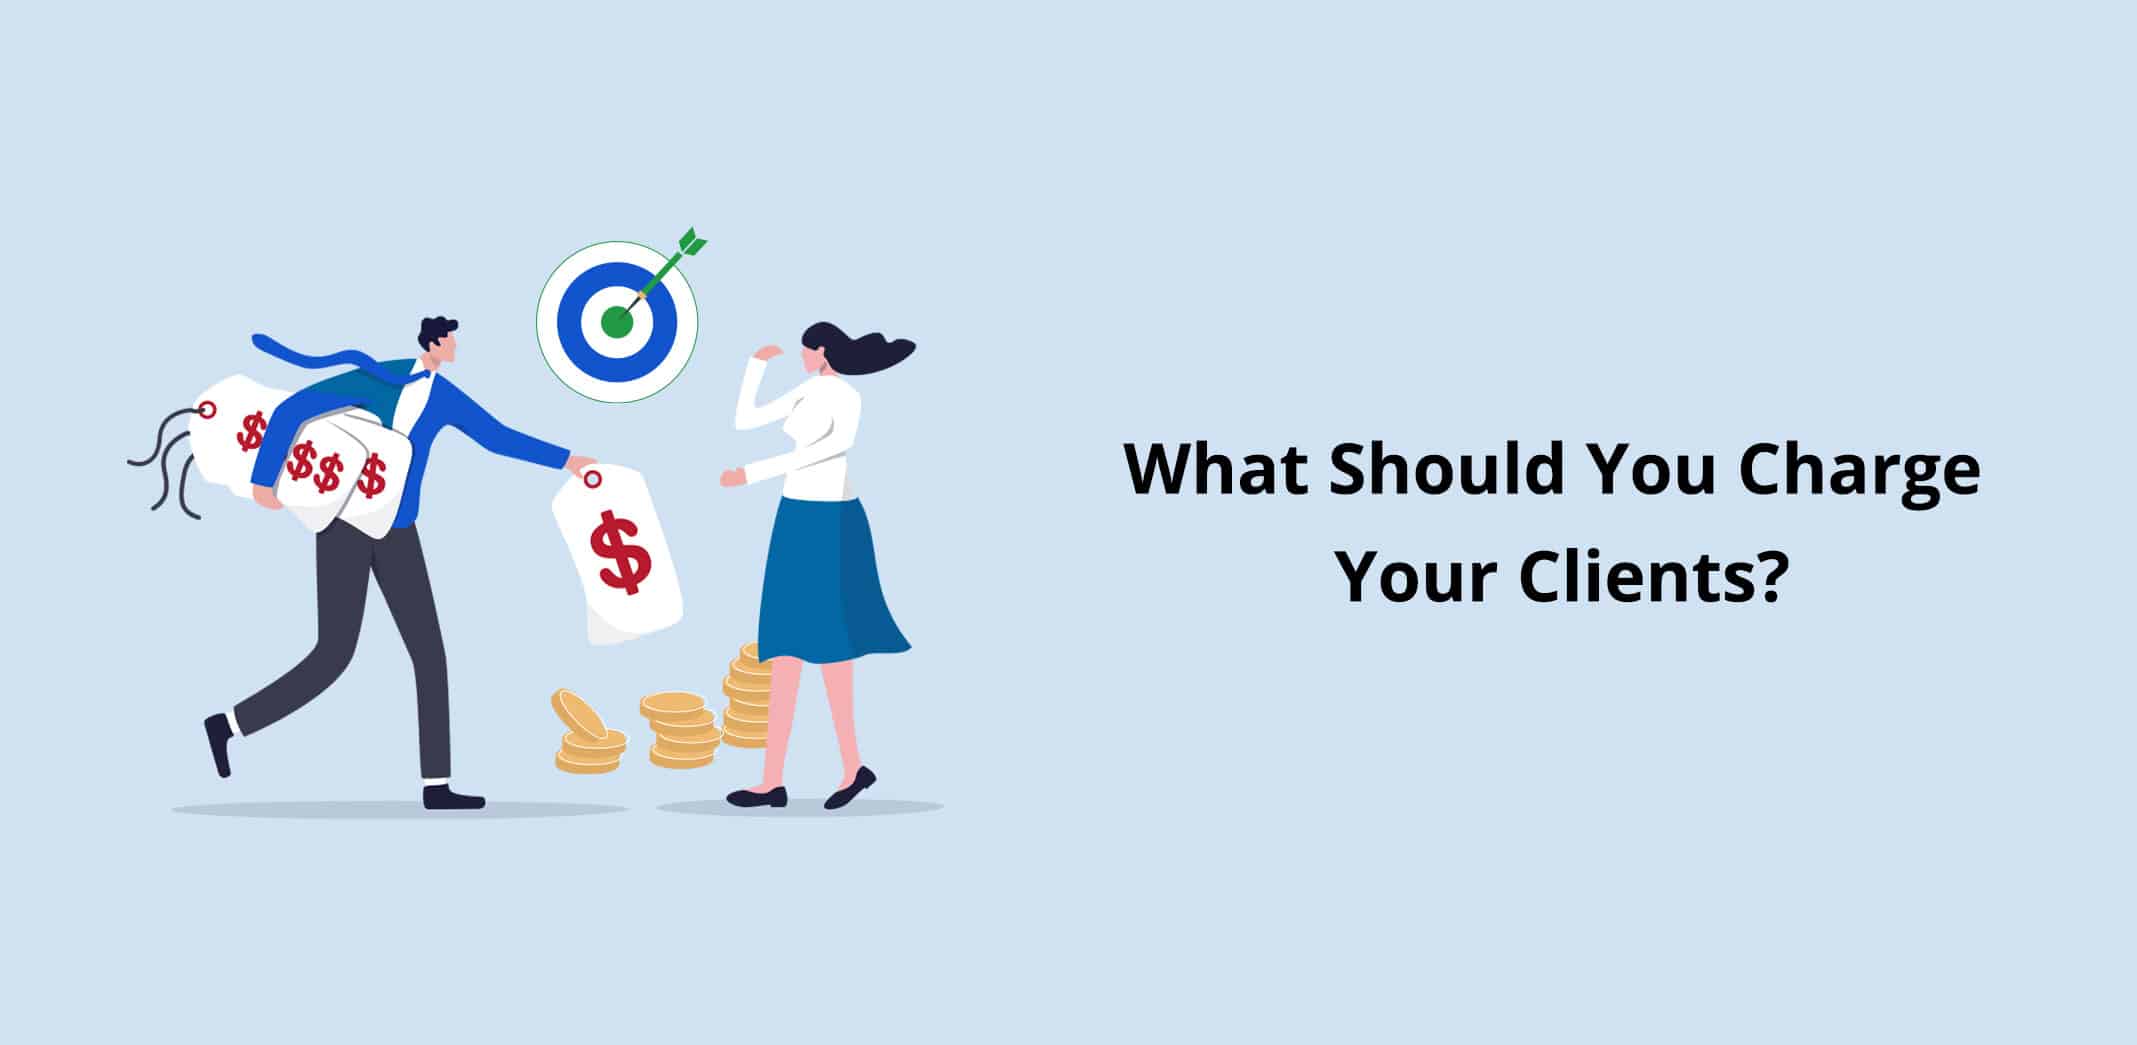 What Should You Charge Your Clients?